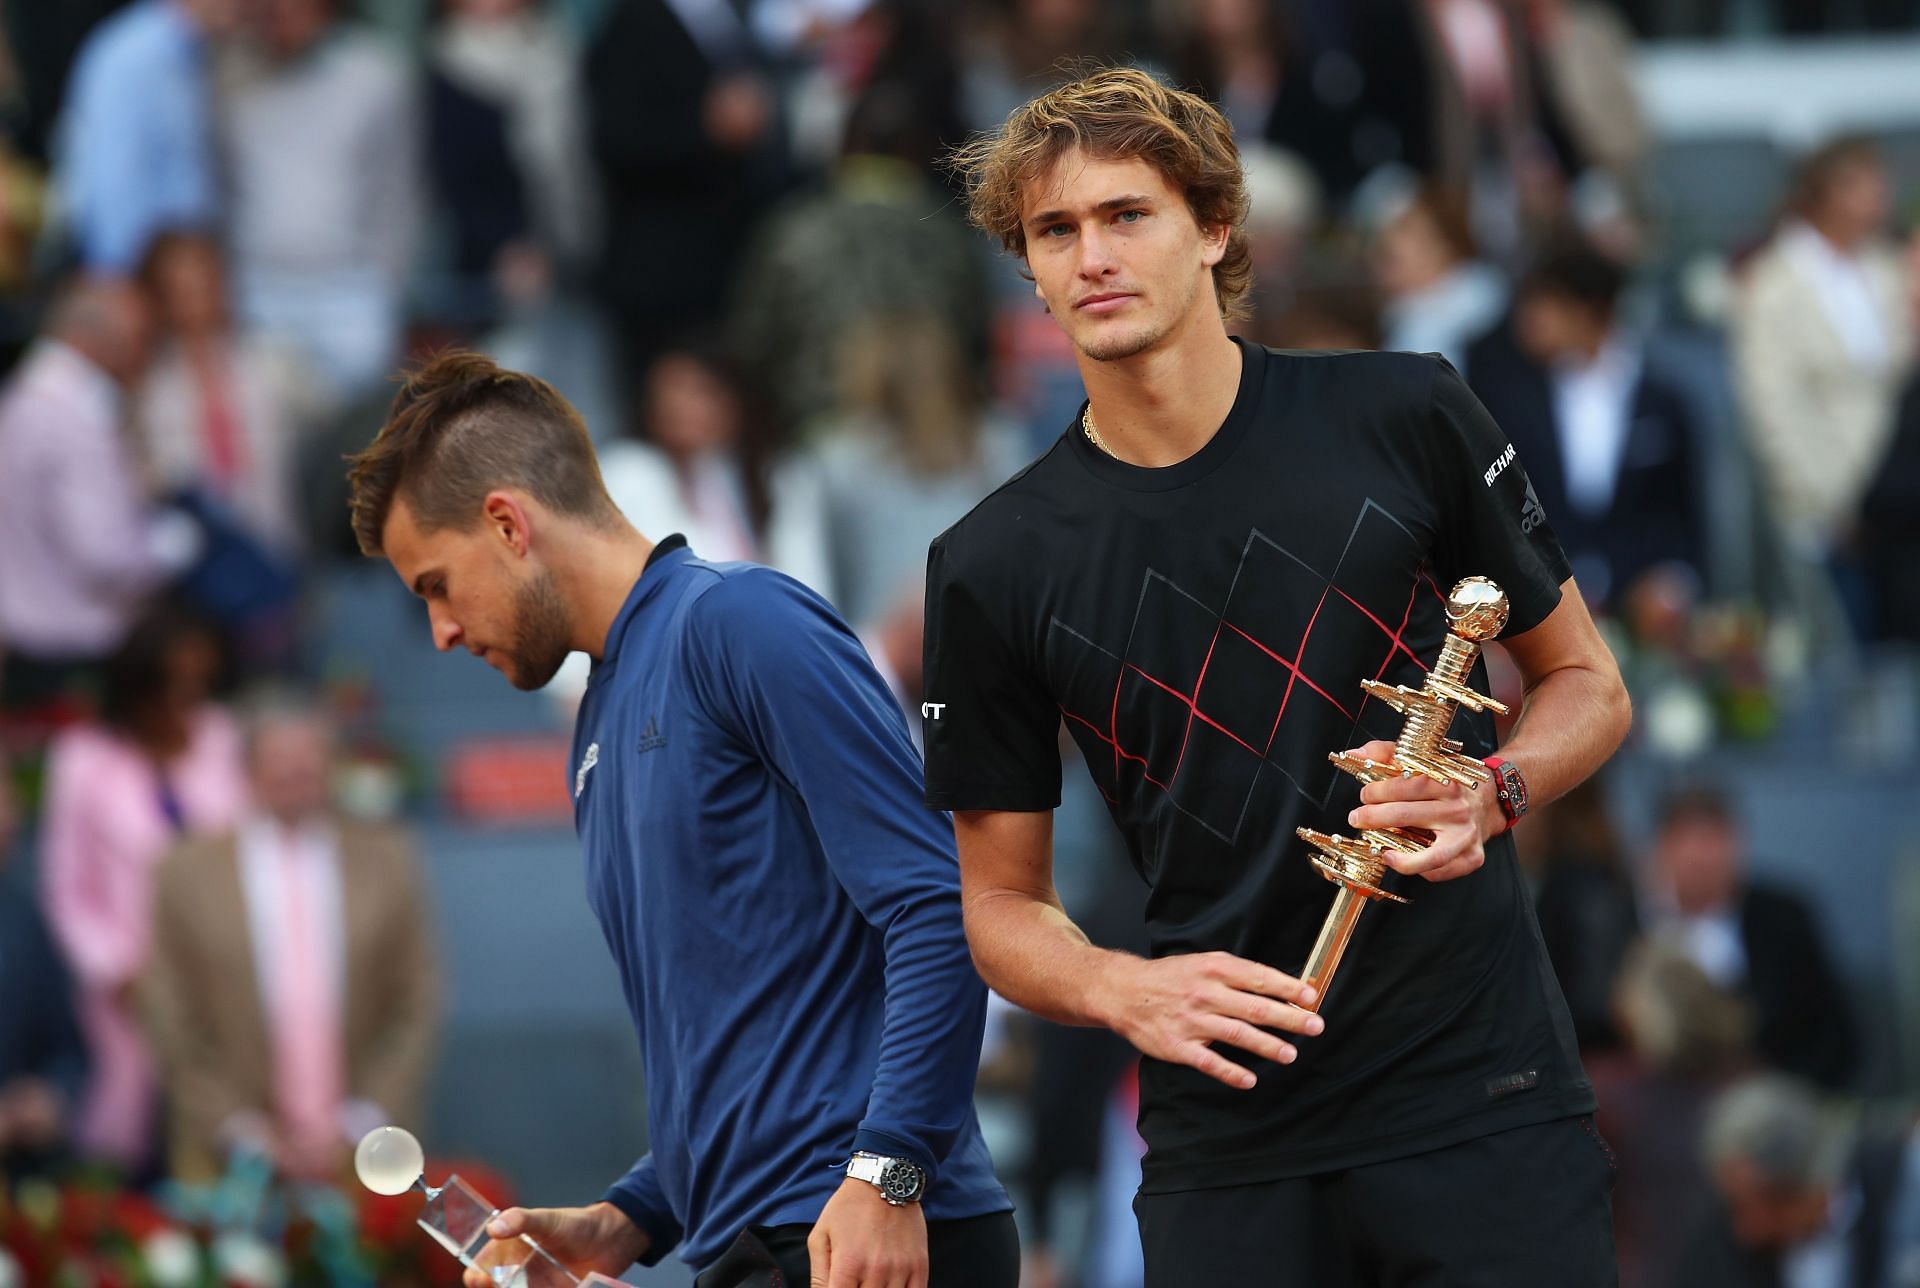 Alexander Zverev (right) won his first Masters Masters title in 2018